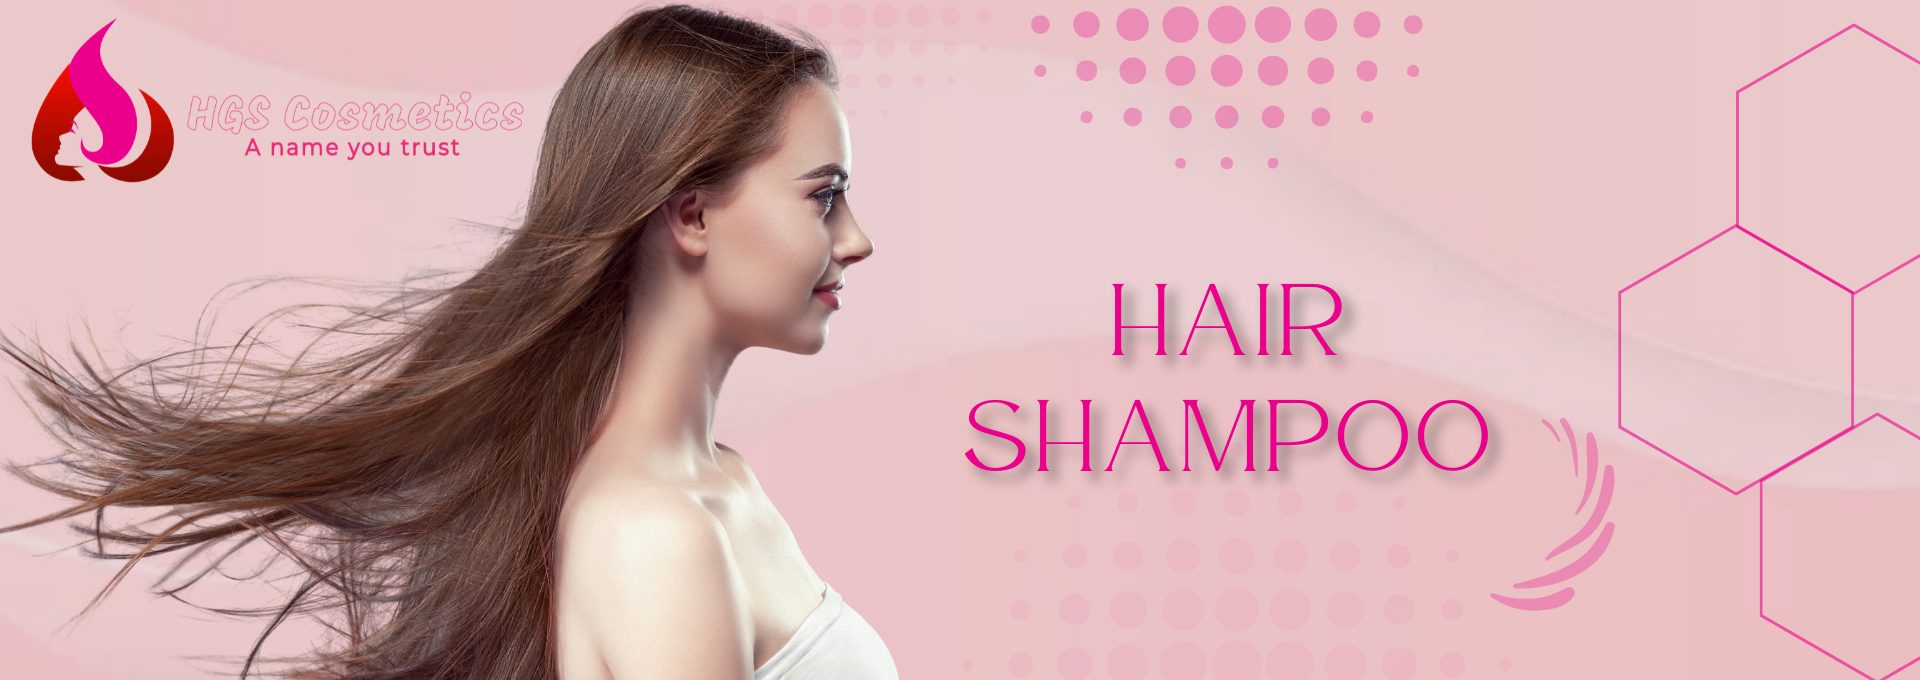 Shop Best Hair Shampoo products Online @ HGS Cosmetics